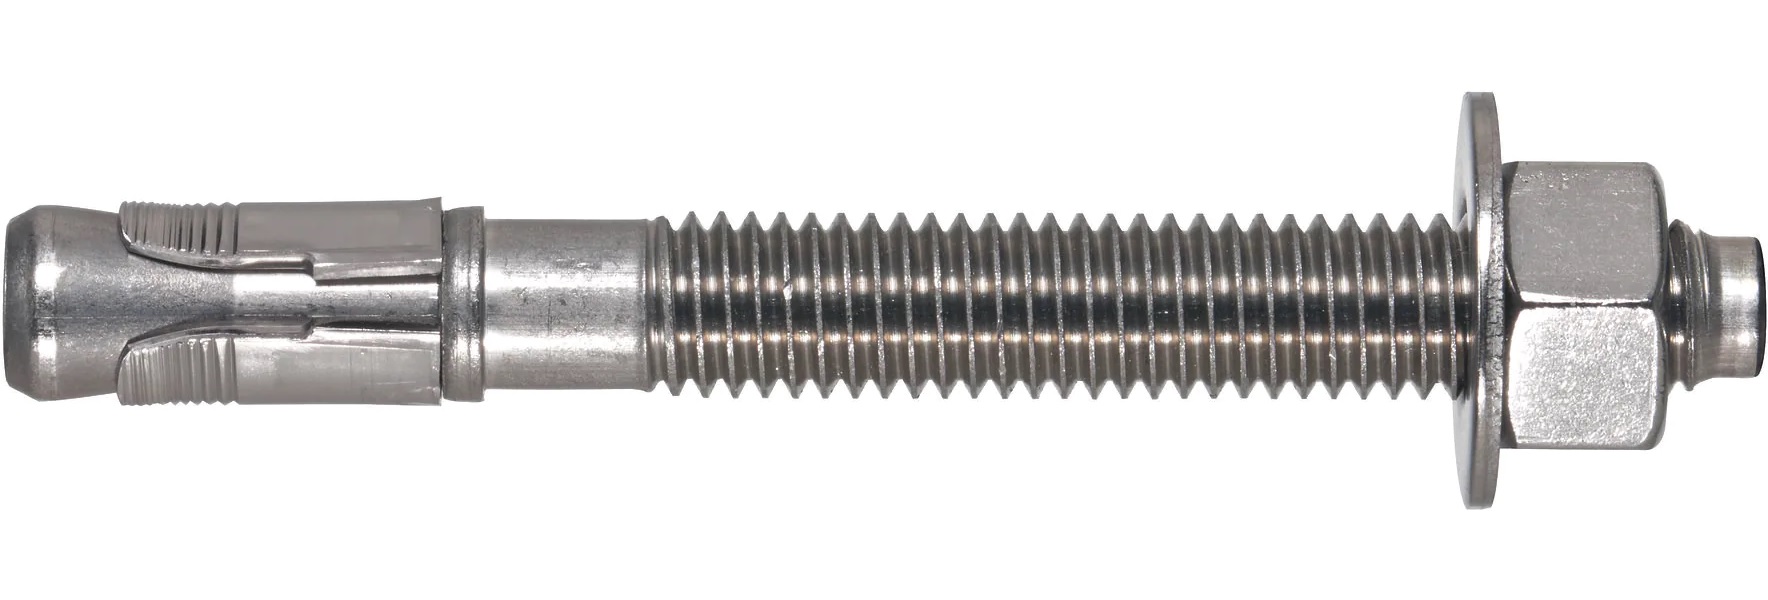 Stud anchor KB3 SS304 5/8x4 3/4 LT (Sold in BOX of 15)